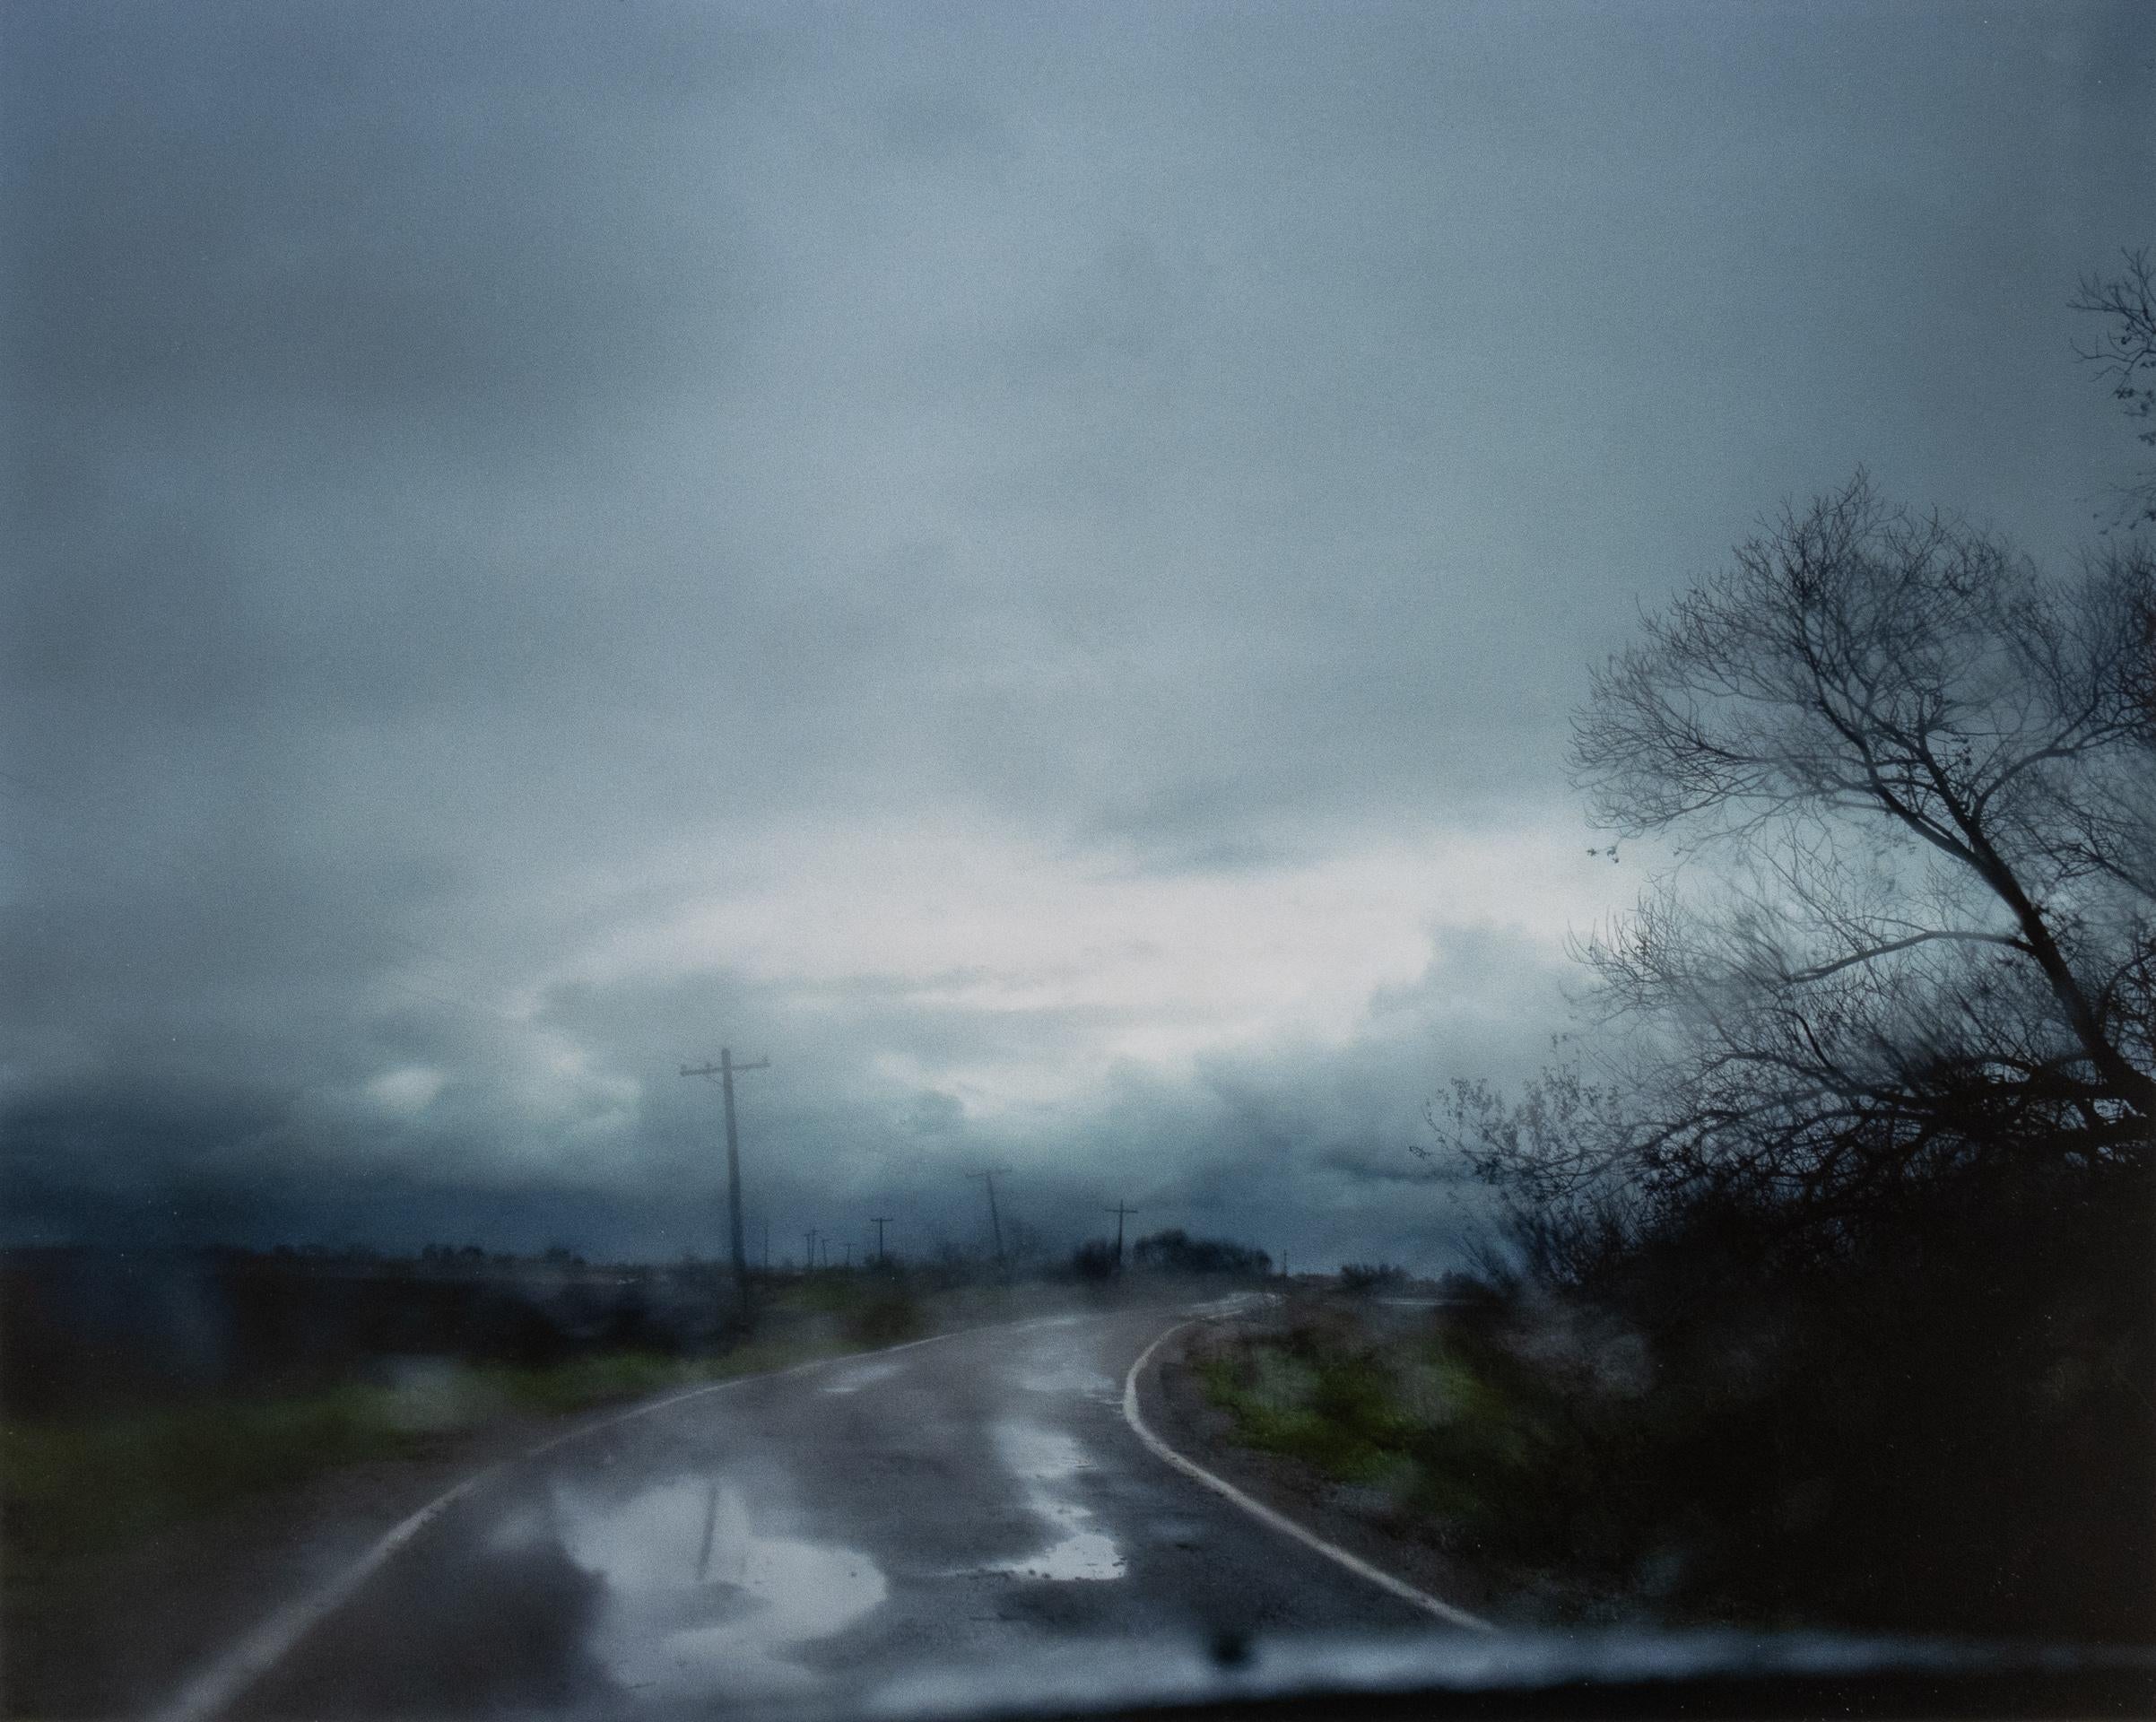 Untitled #8747 (from "A Road Divided") - Photograph by Todd Hido